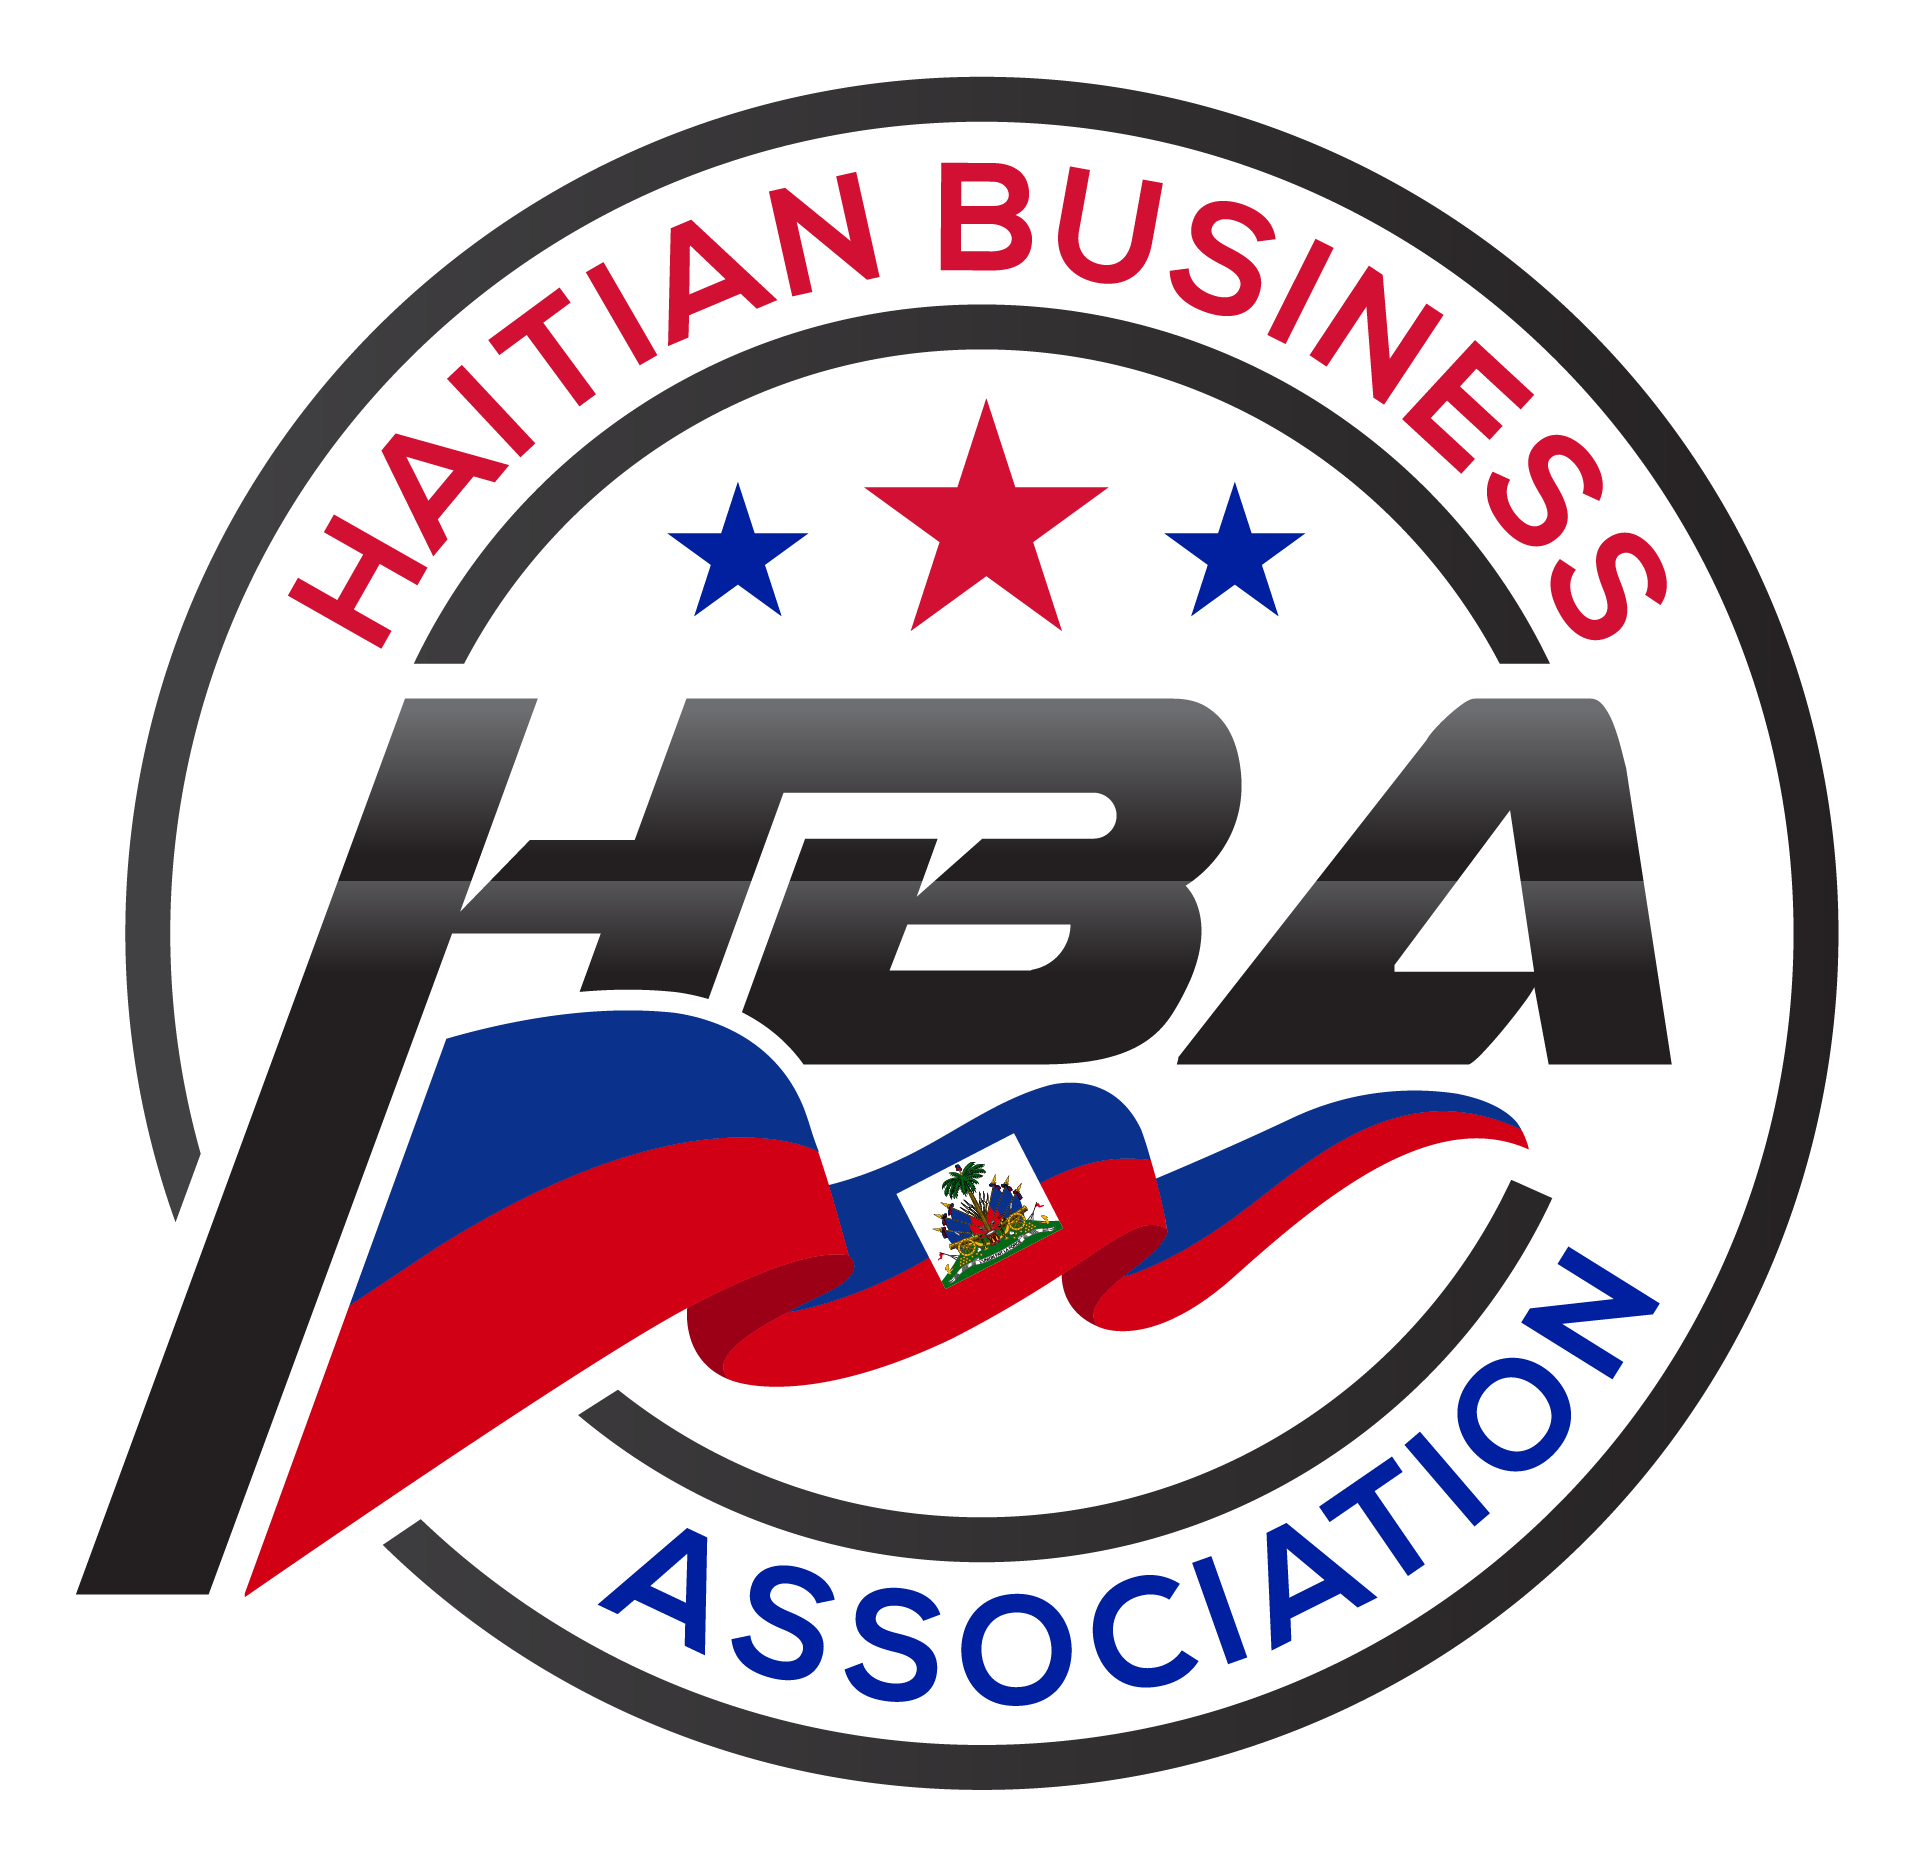 Haitian Business Association of the Eastern Shore